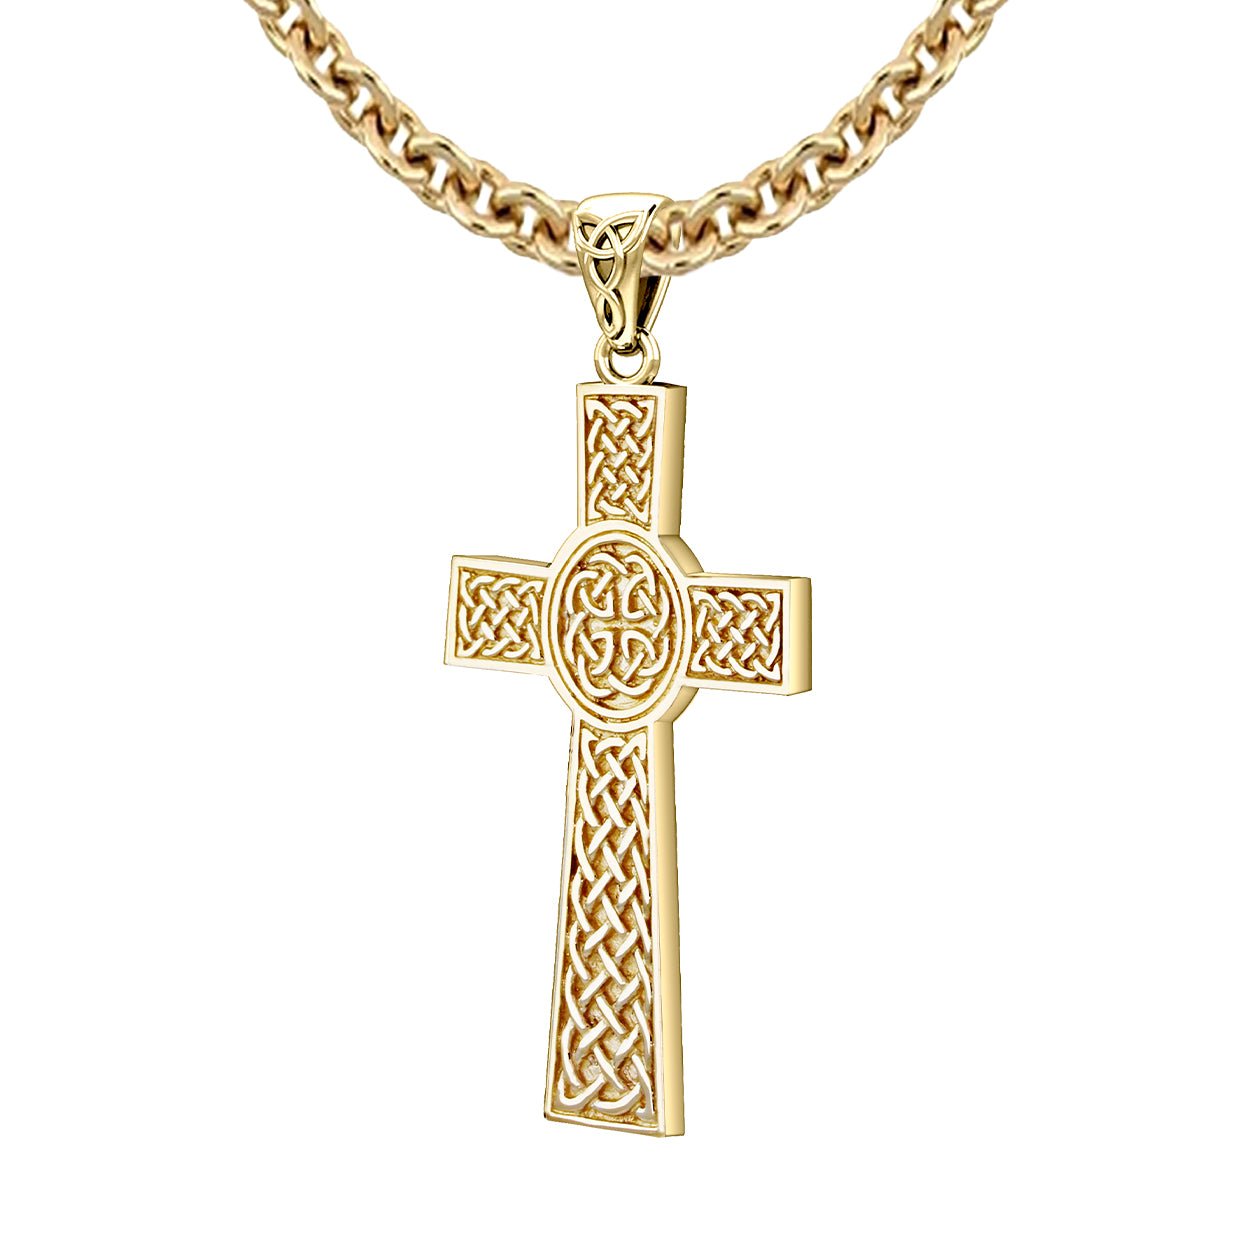 Buy Celtic Cross Pendant Necklace Gold Filled Vermeil Small Dainty Little Necklaces  Irish Jewelry Women Girls Gift Online in India - Etsy